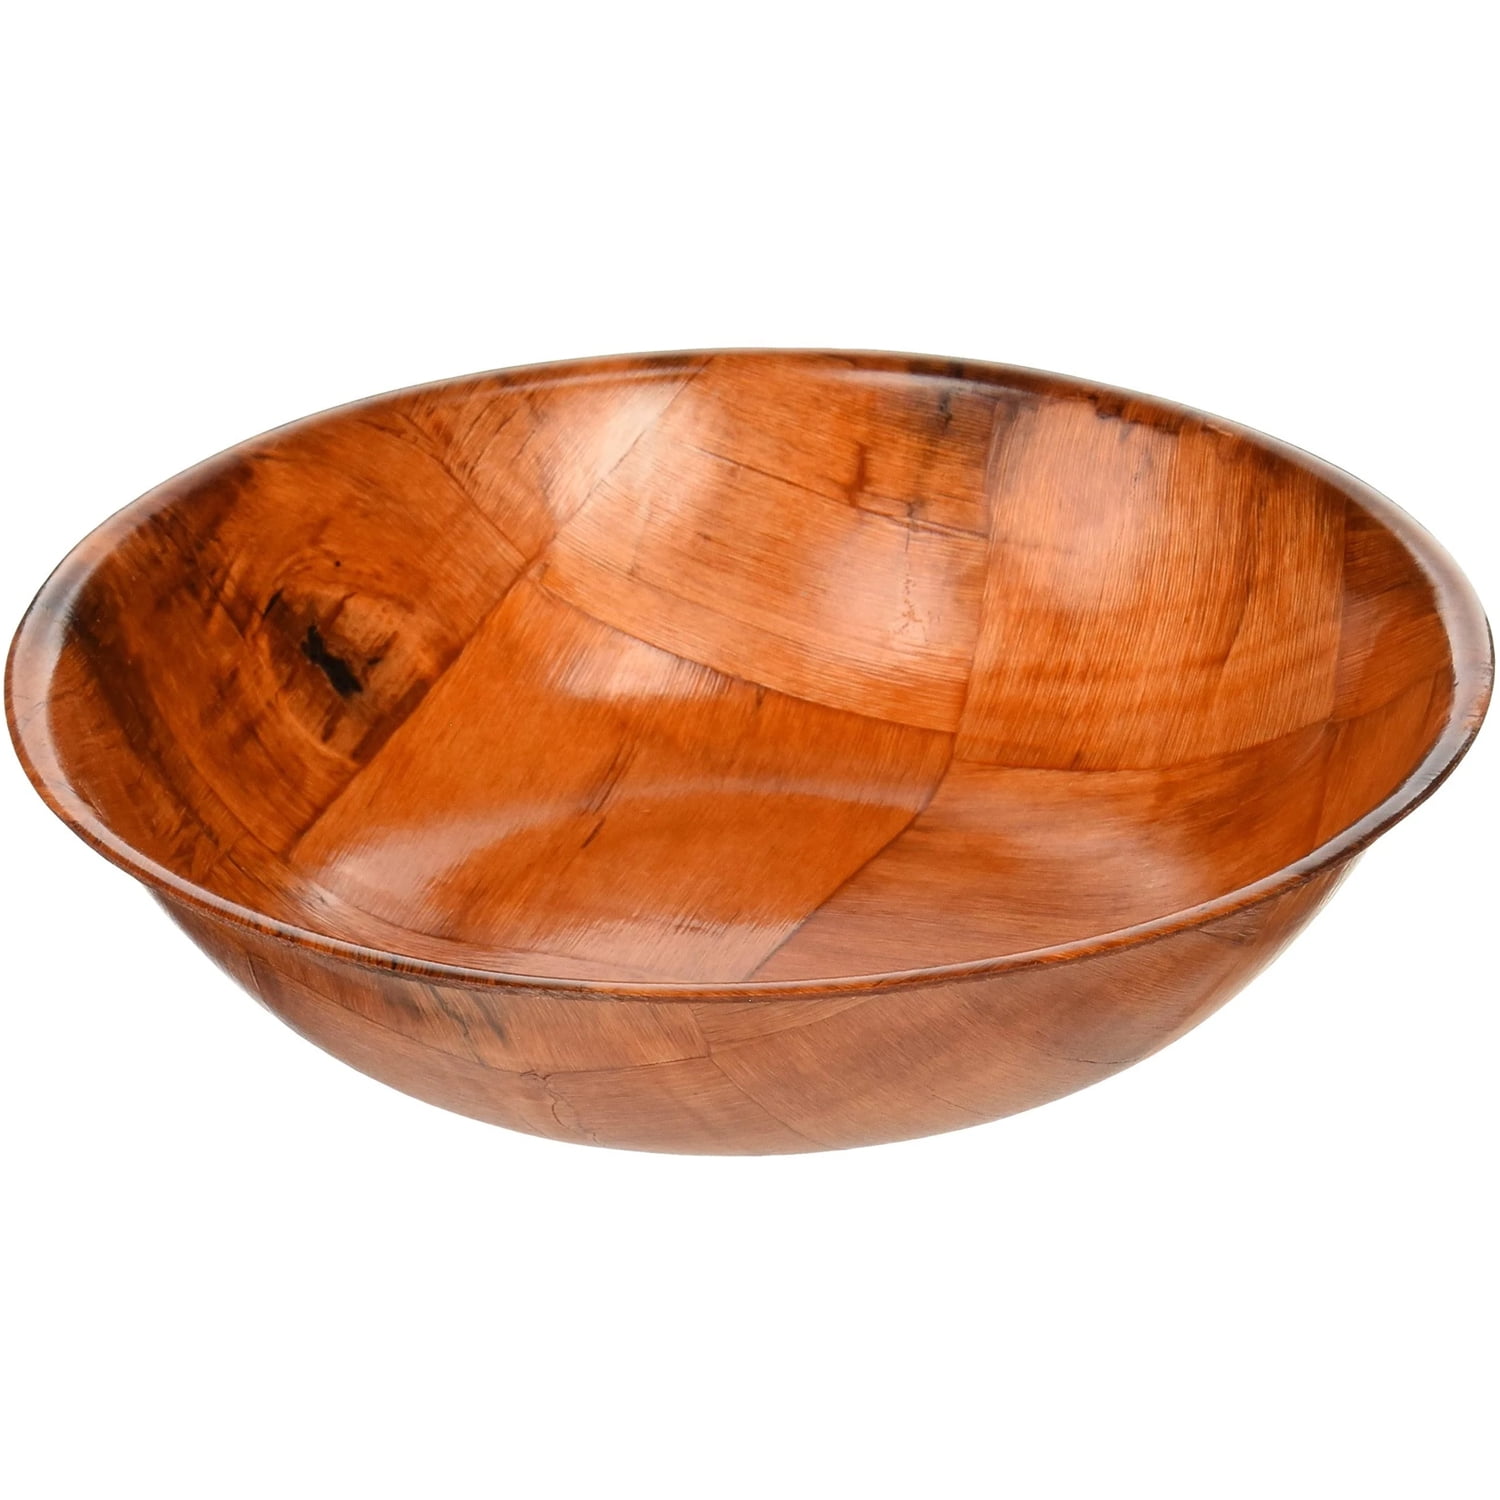 Winware by Winco Woven Wooden Salad Bowl Size 16" x 3-1/2" 